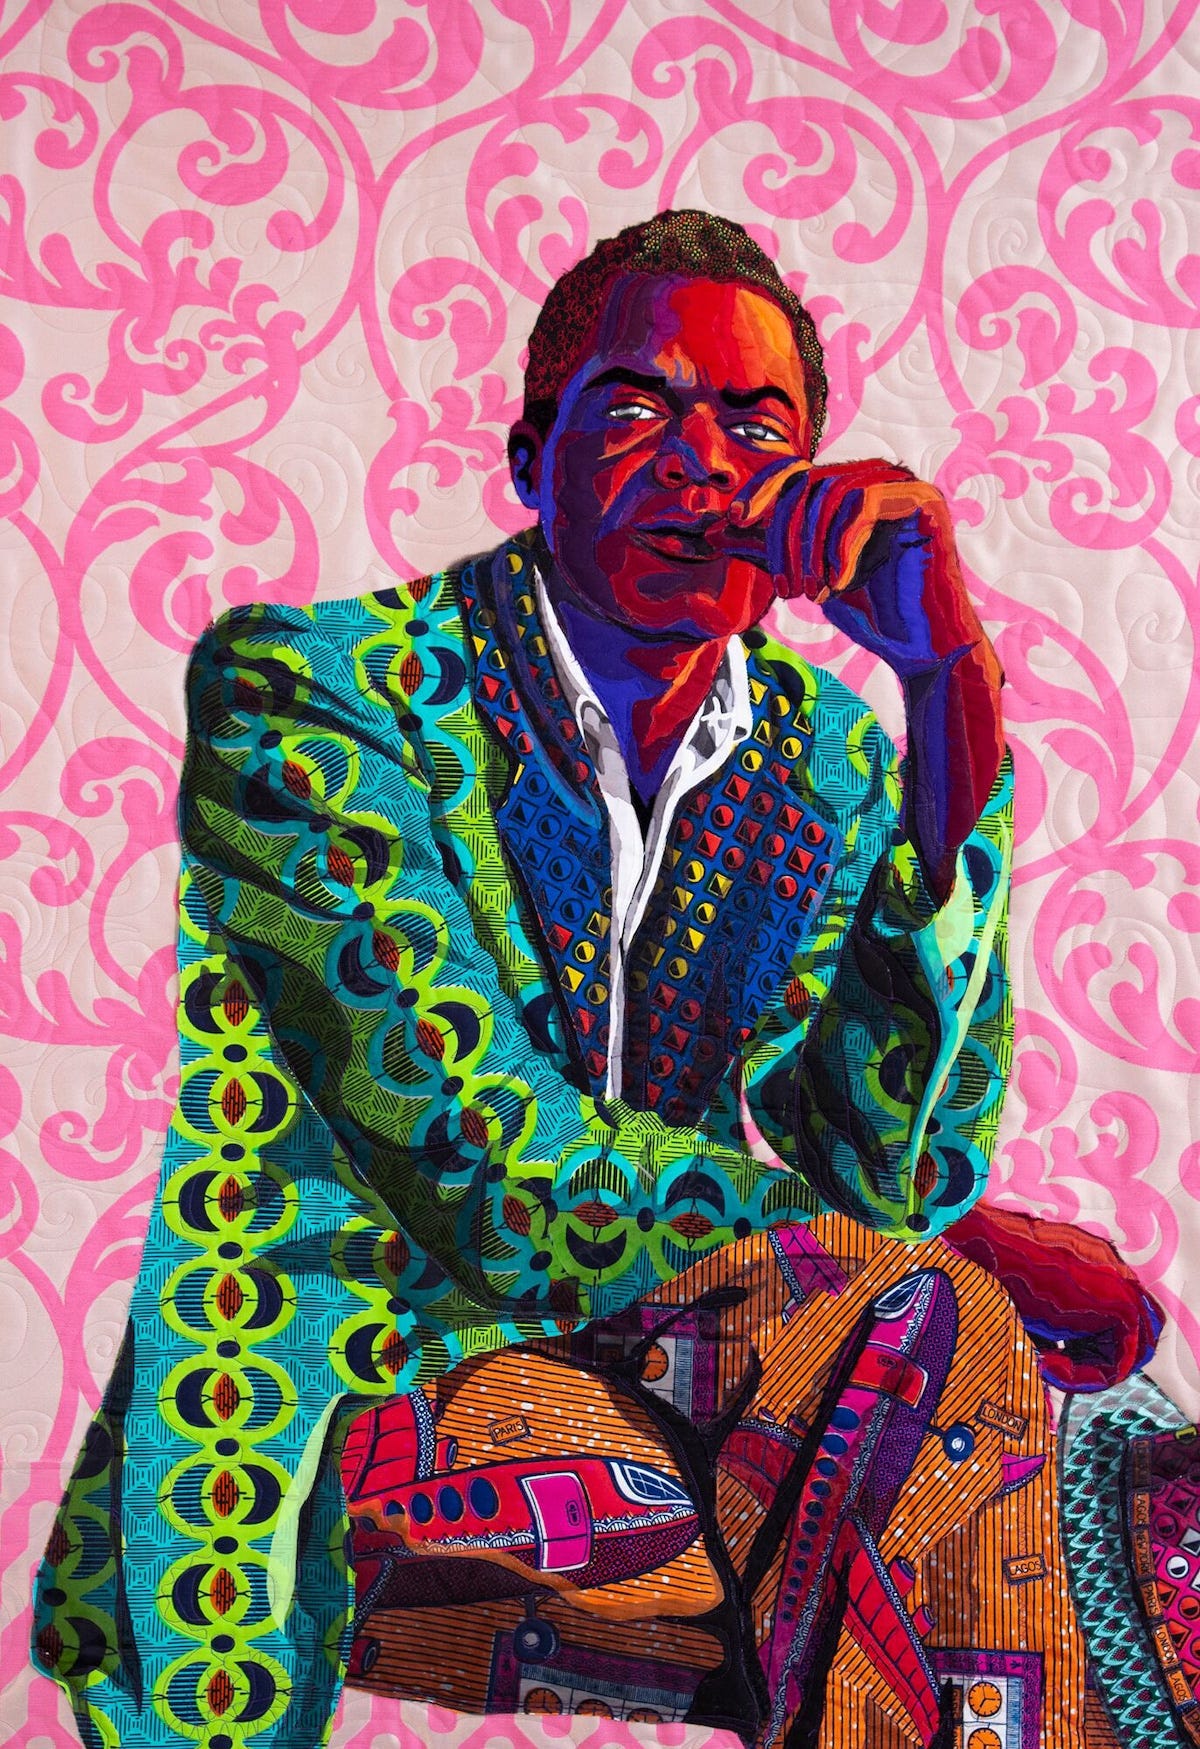 Contemporary Quilting of African American Portraits Carry On the Tradition